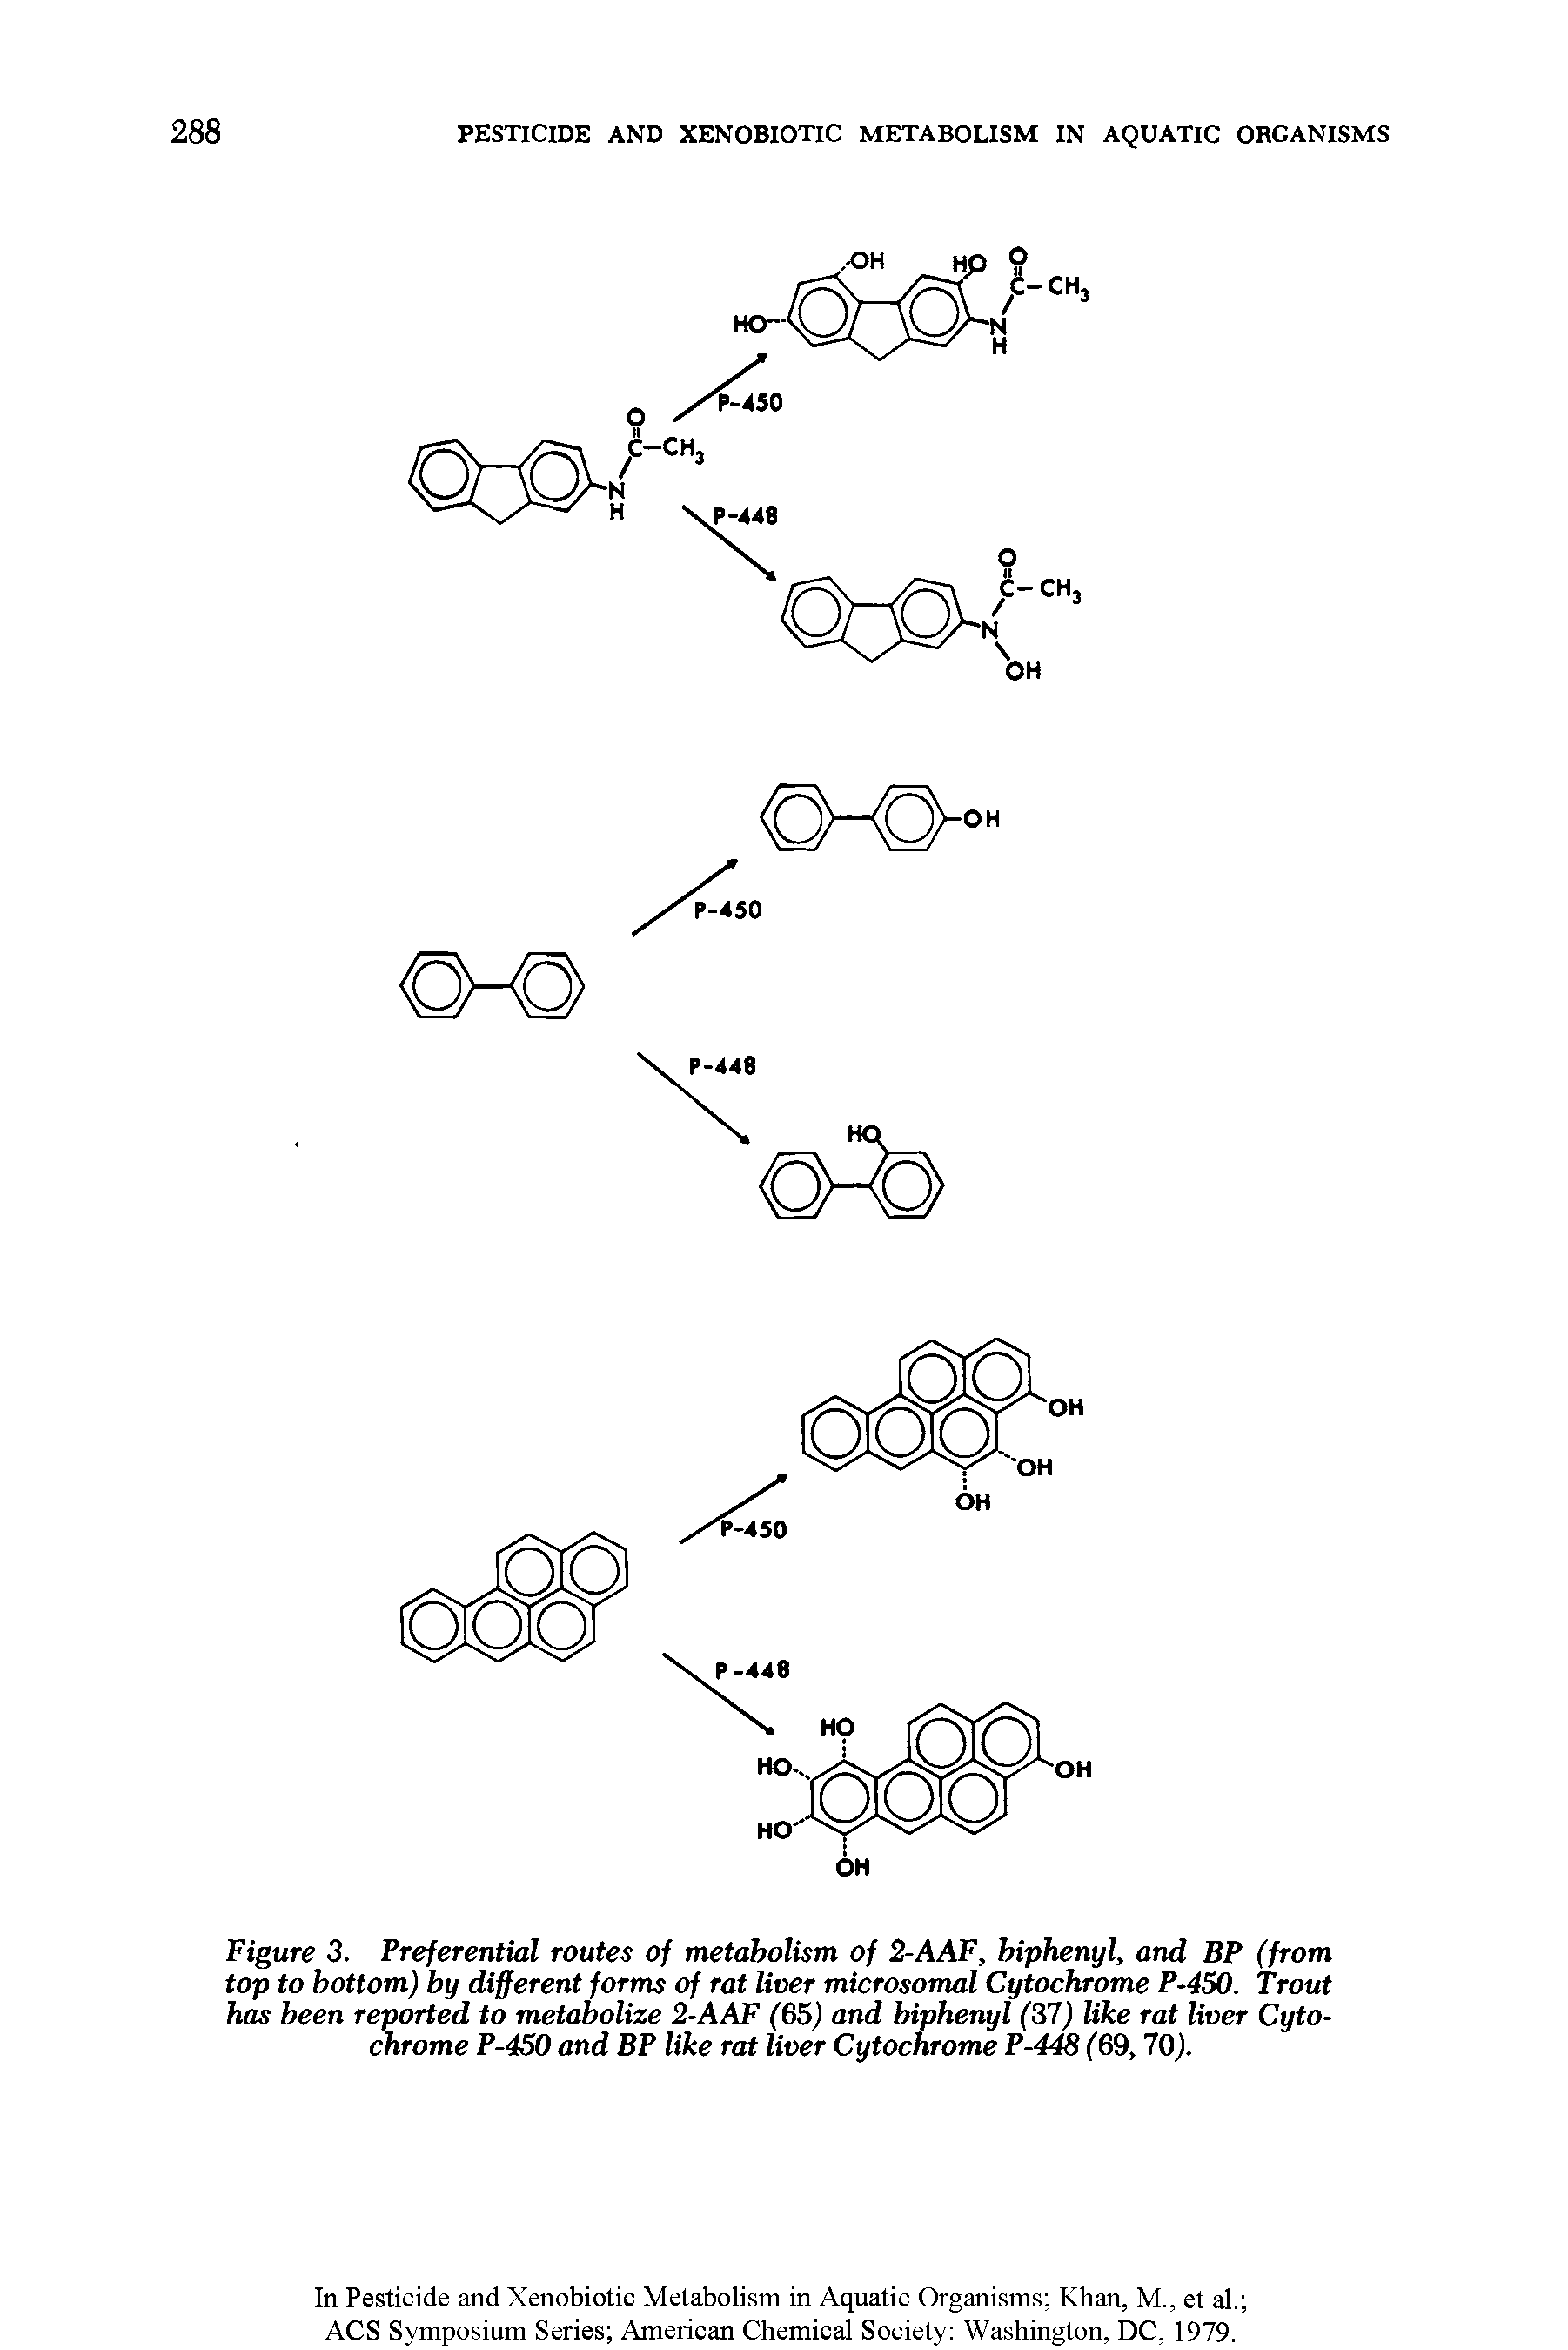 Figure 3. Preferential routes of metabolism of 2-AAF, biphenyl, and BP (from top to bottom) by different forms of rat liver microsomal Cytochrome P-450. Trout has been reported to metabolize 2-AAF (65) and biphenyl (37) like rat liver Cytochrome P-450 and BP like rat liver Cytochrome P-448 (69,70).